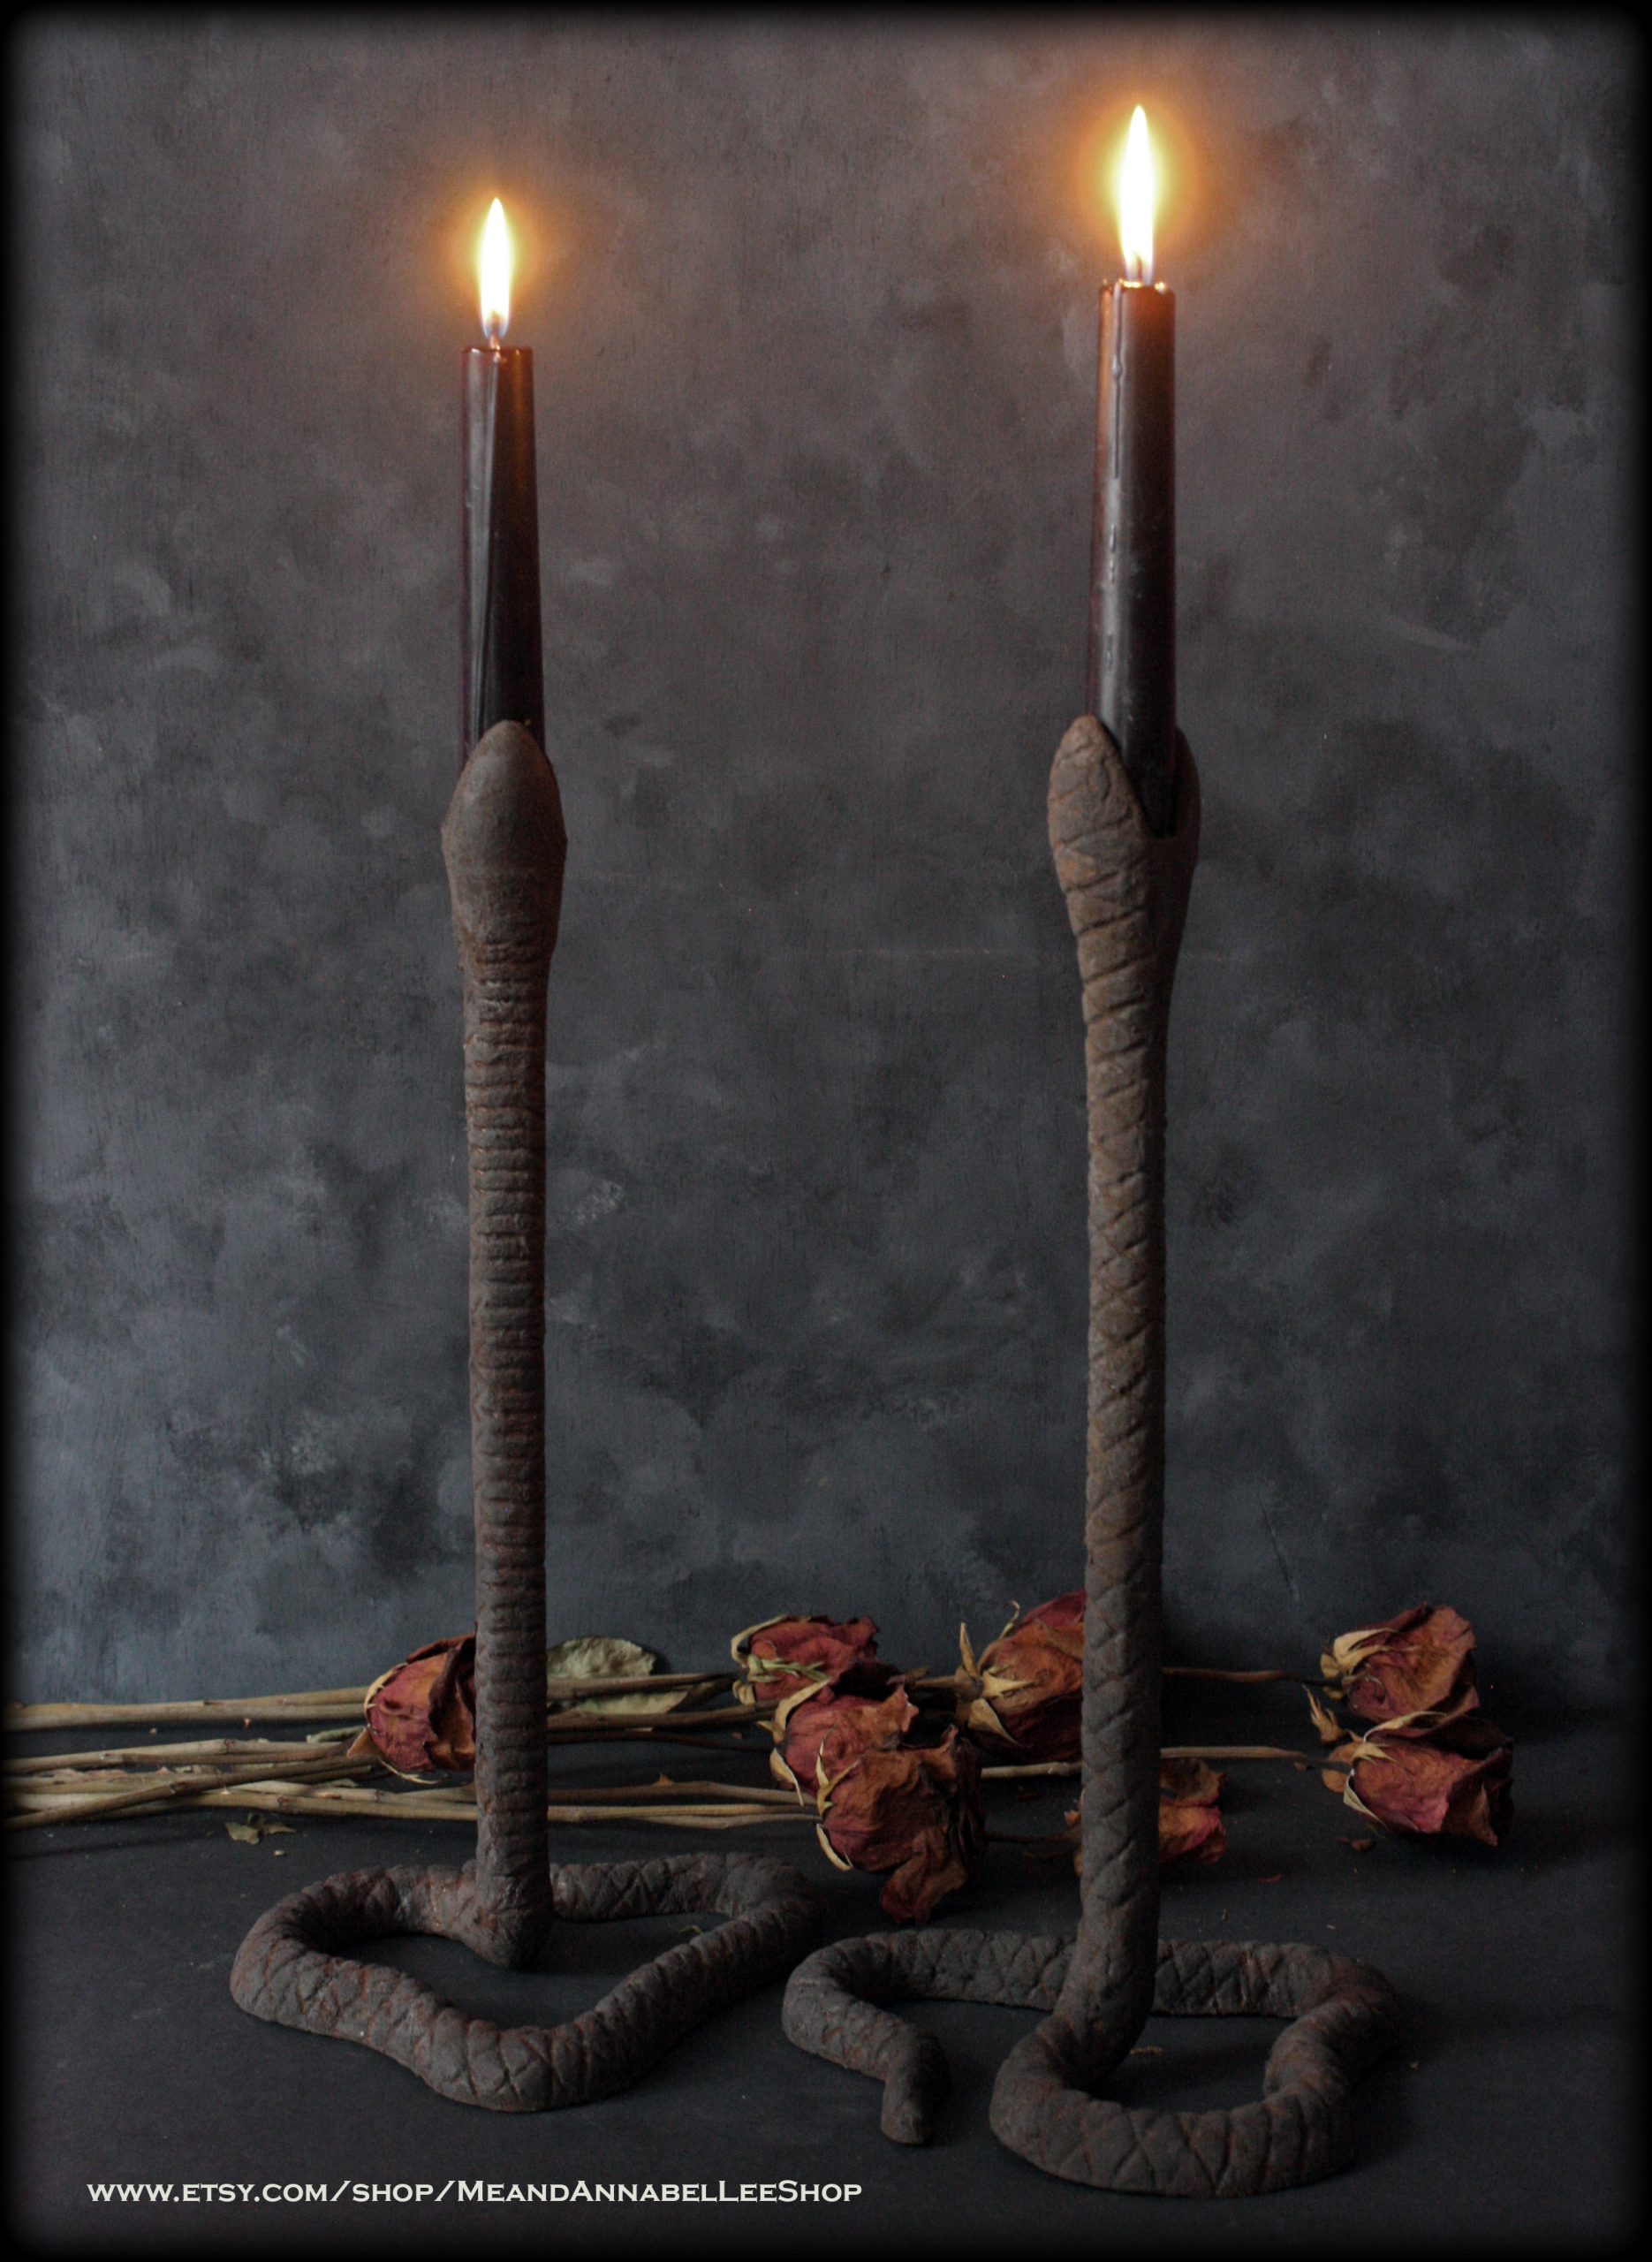 Gothic Antique Snake Candle Holders | Transform Halloween Decorations into something sophisticated you can use all year long by adding a rusted antique finish | Art Deco to Gothic Decor | Serpent Candlesticks | Me and Annabel Lee Blog